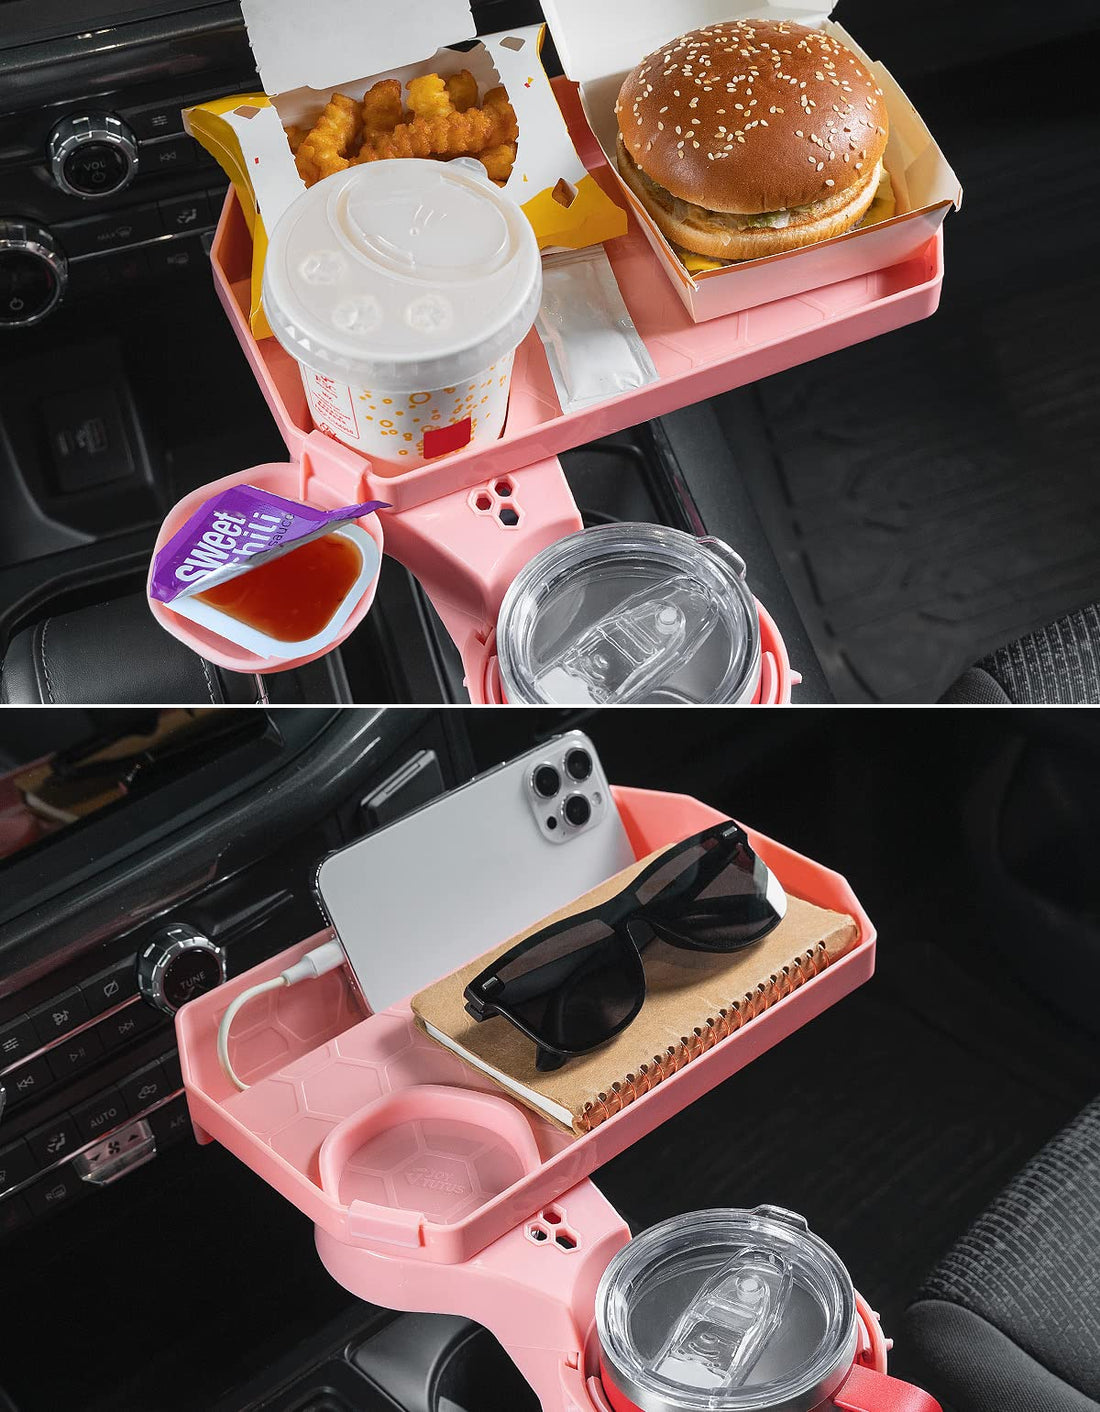 Car Cup Holder Expander, Adapt with 18-40 oz, fit in 2.75-3.25 inch Car Holder